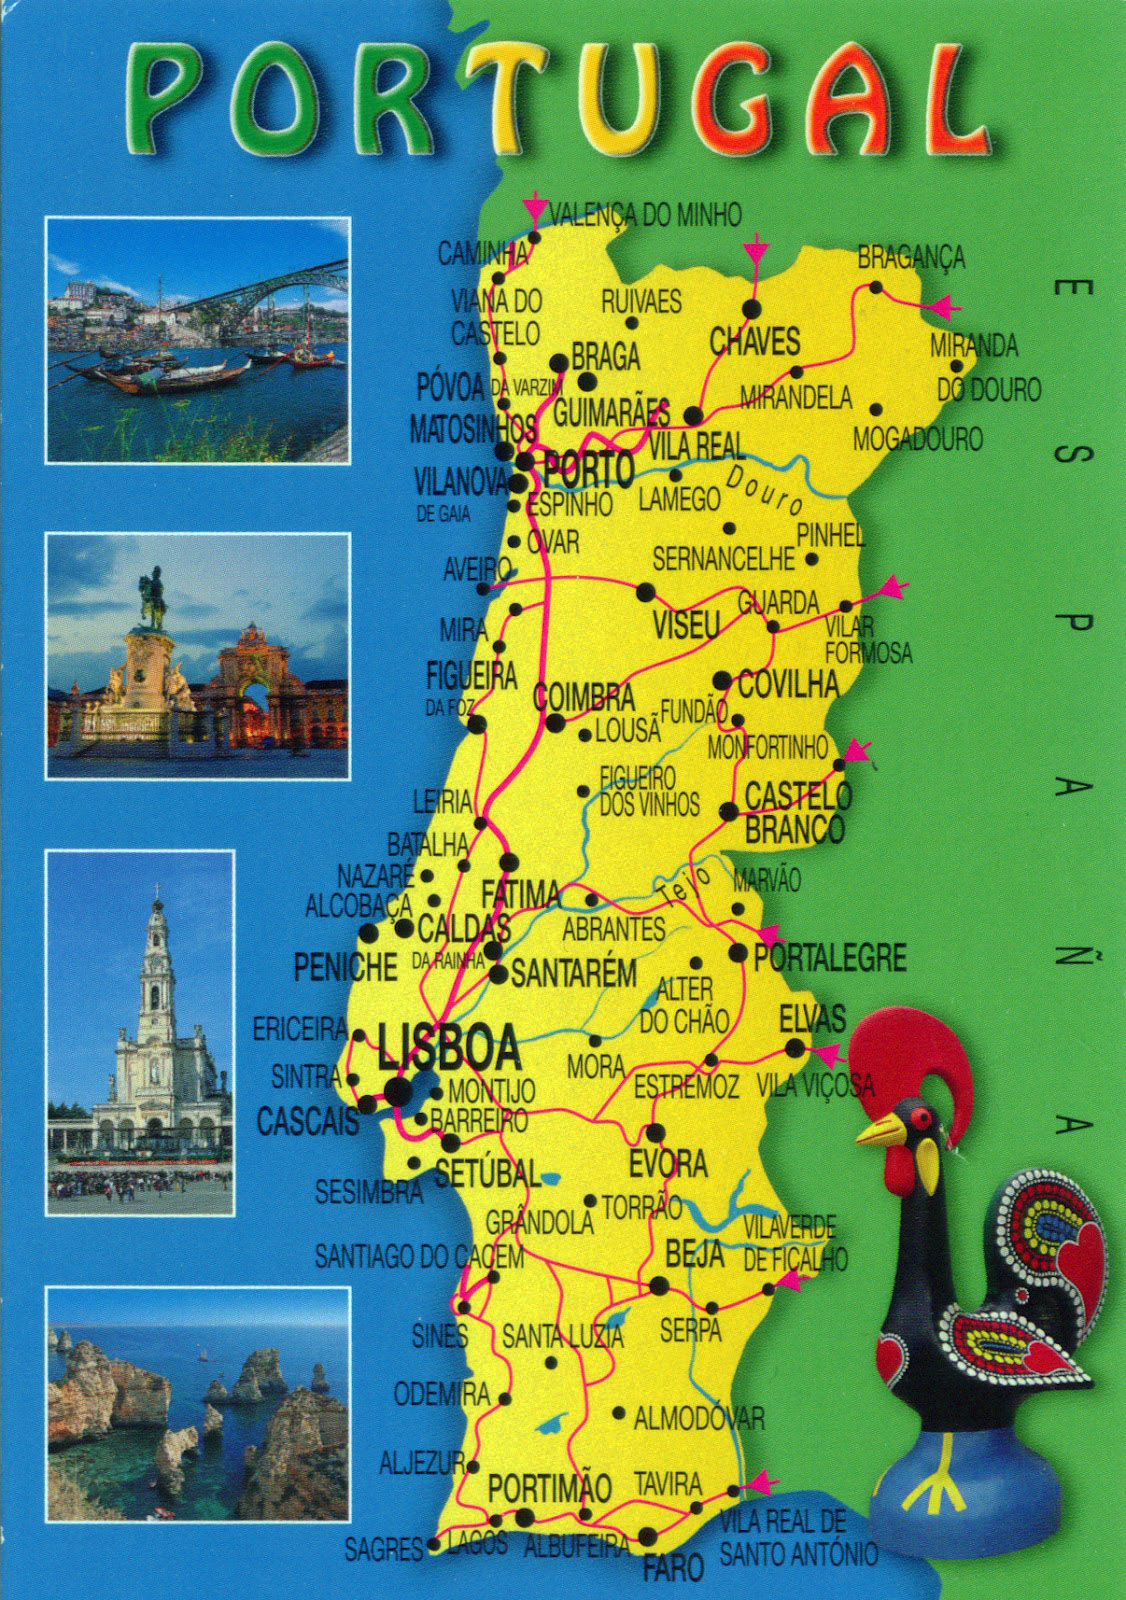 large-tourist-map-of-portugal-with-roads-and-cities-portugal-europe